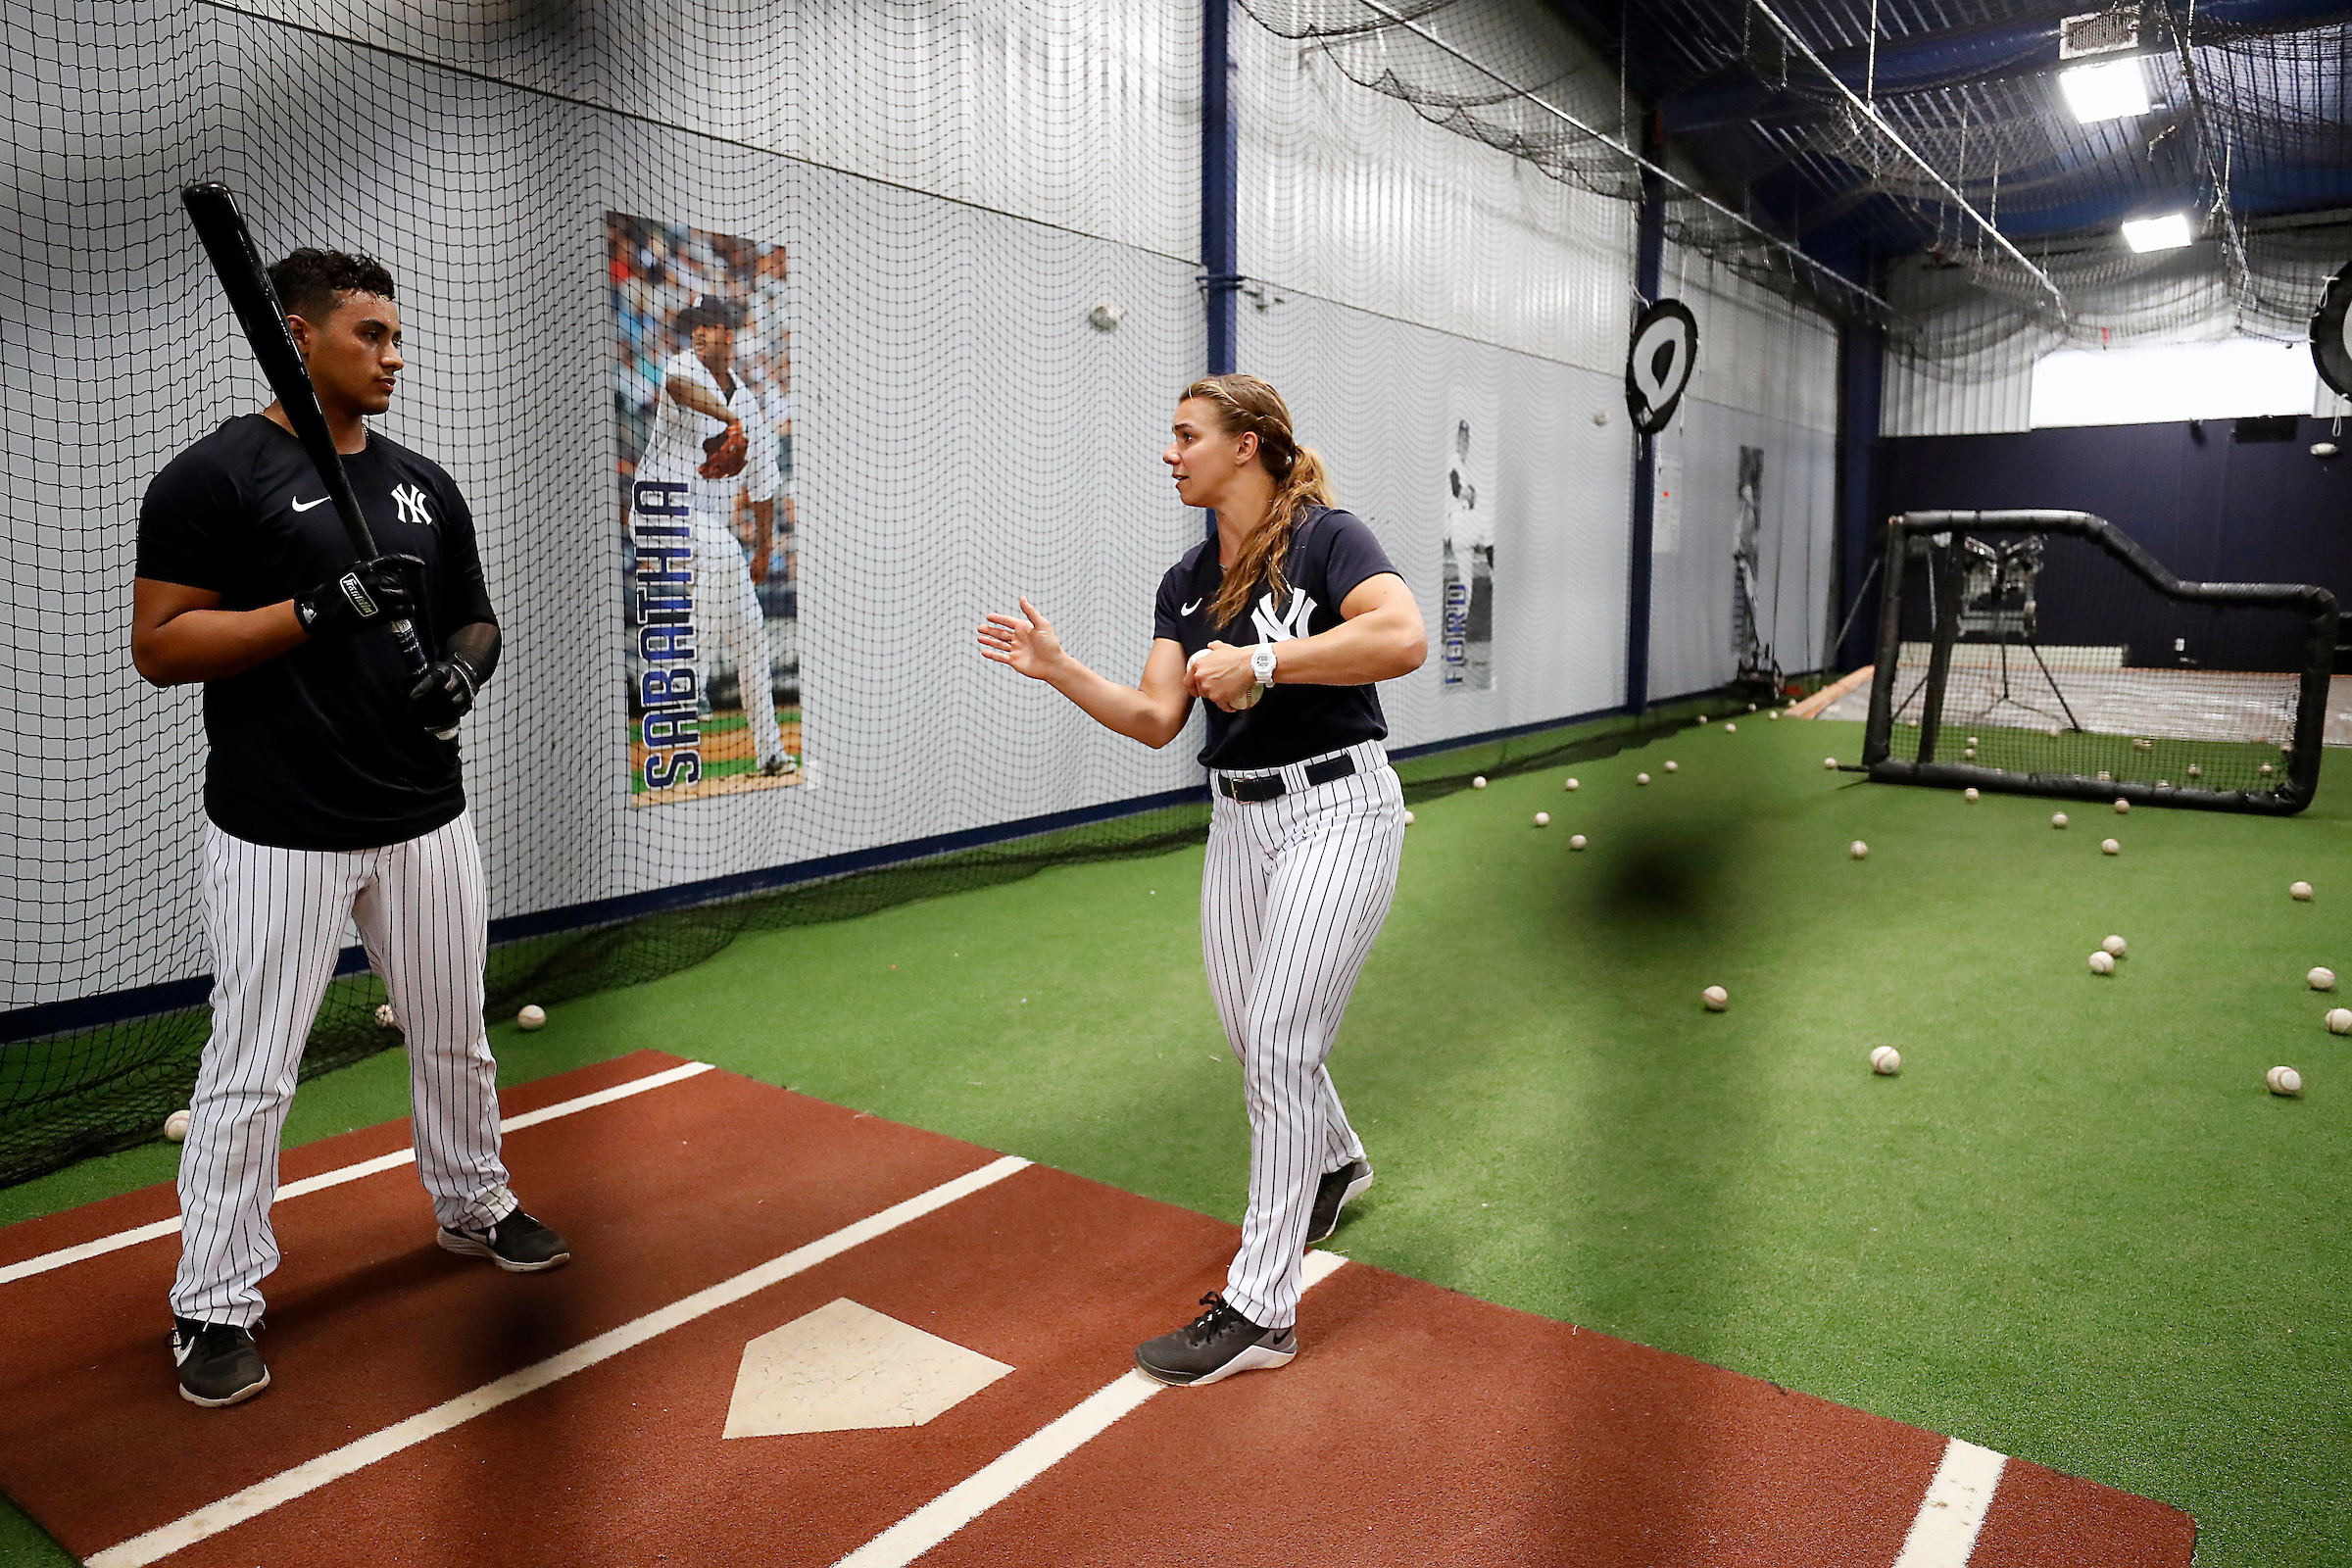 Rachel Balkovec: Manager of the Tampa Tarpons - The New York Times